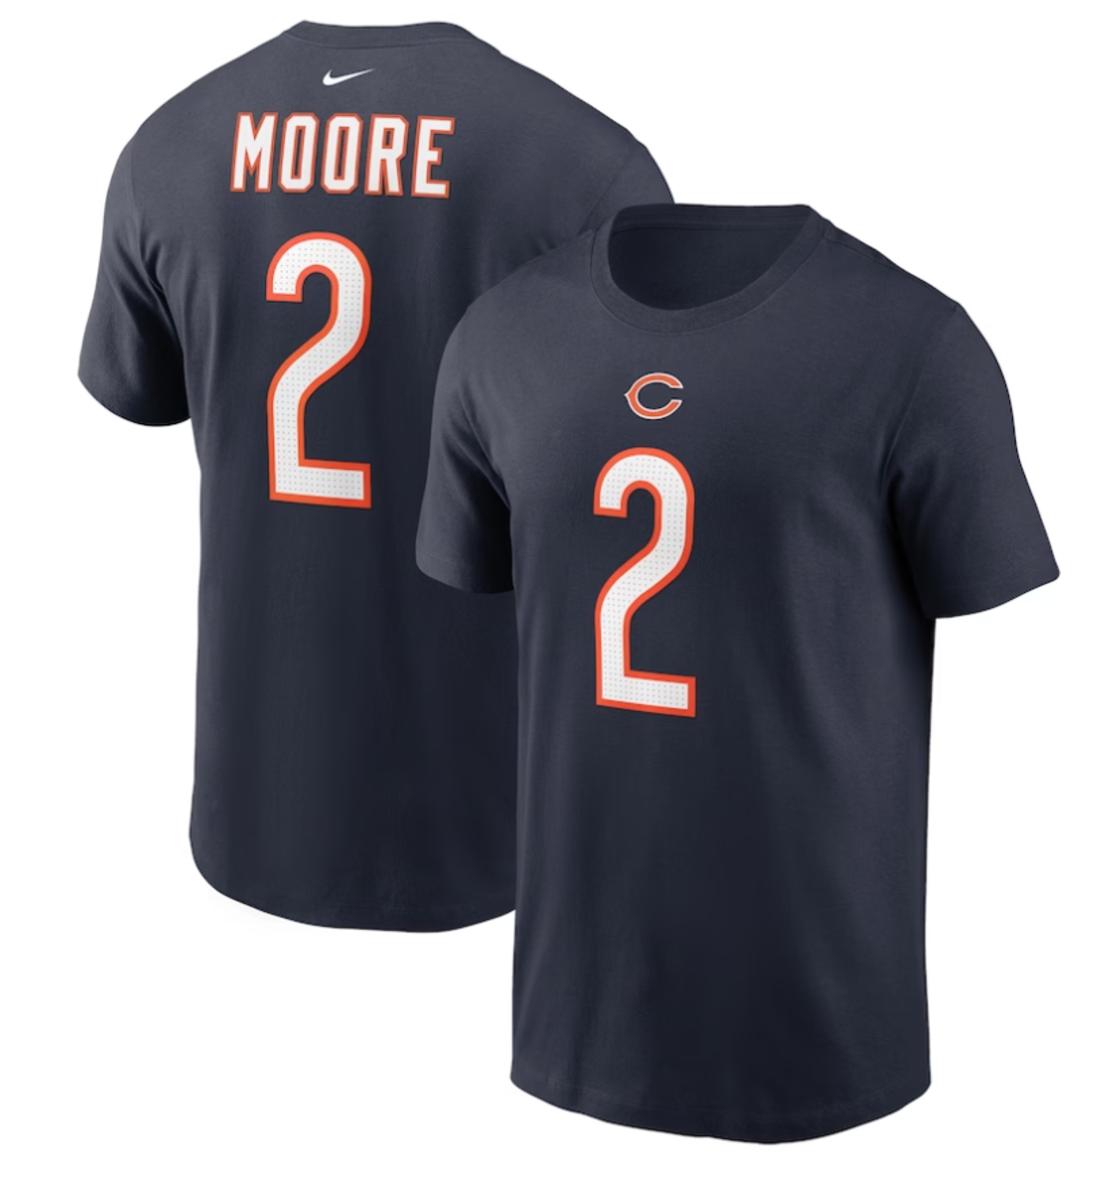 DJ Moore Chicago Bears Nike Player Name & Number T-Shirt - $39.99